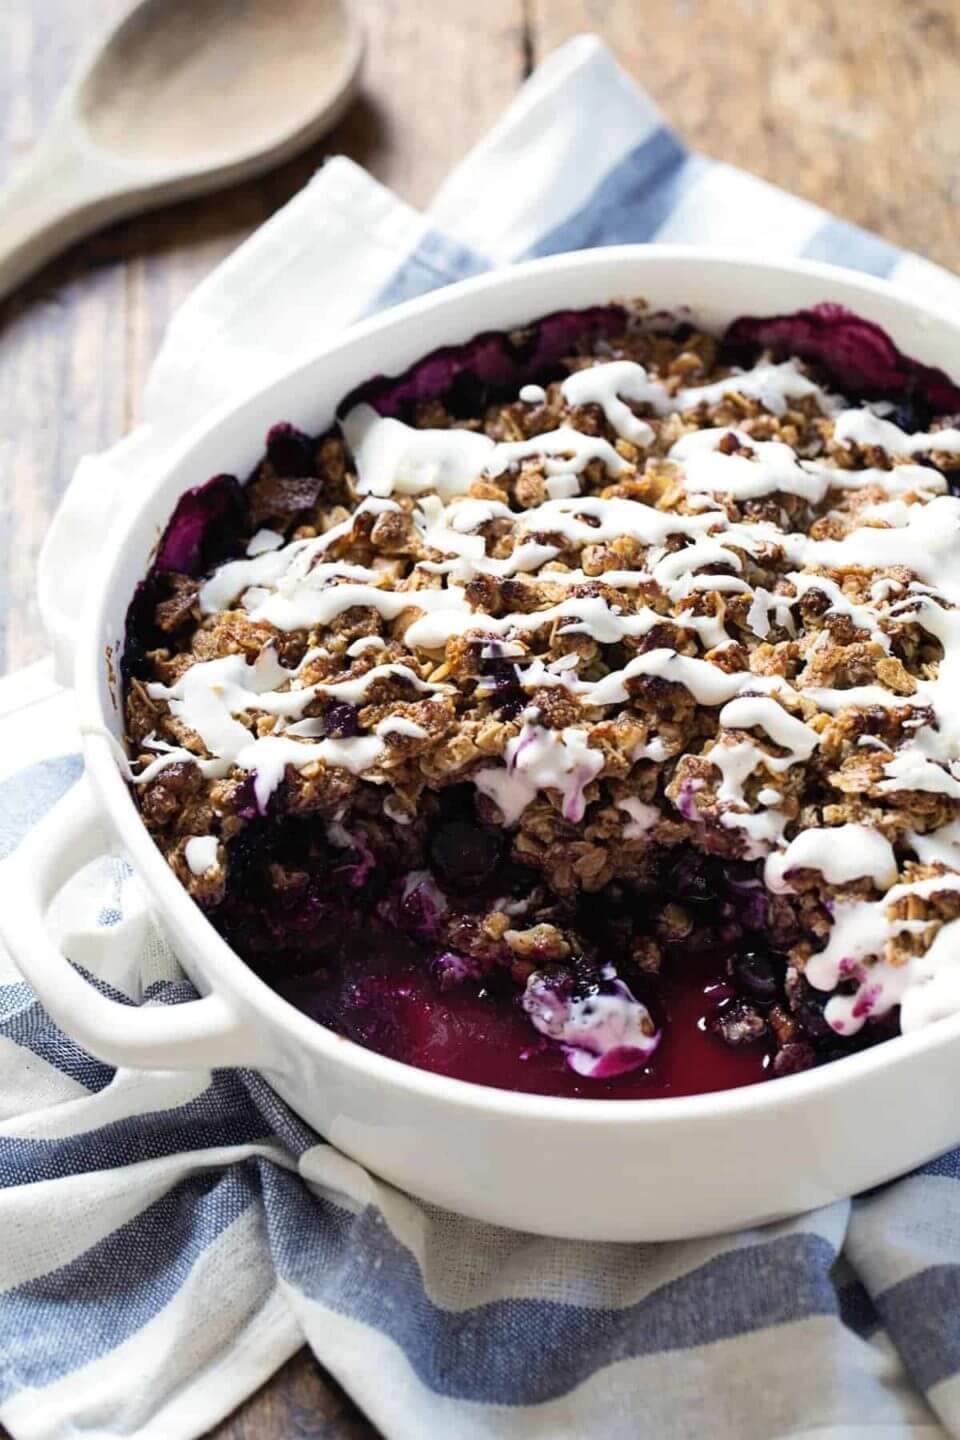 Pinch Of Yum's Simple Oat & Pecan Blueberry Crisp in The Love Of Home #14